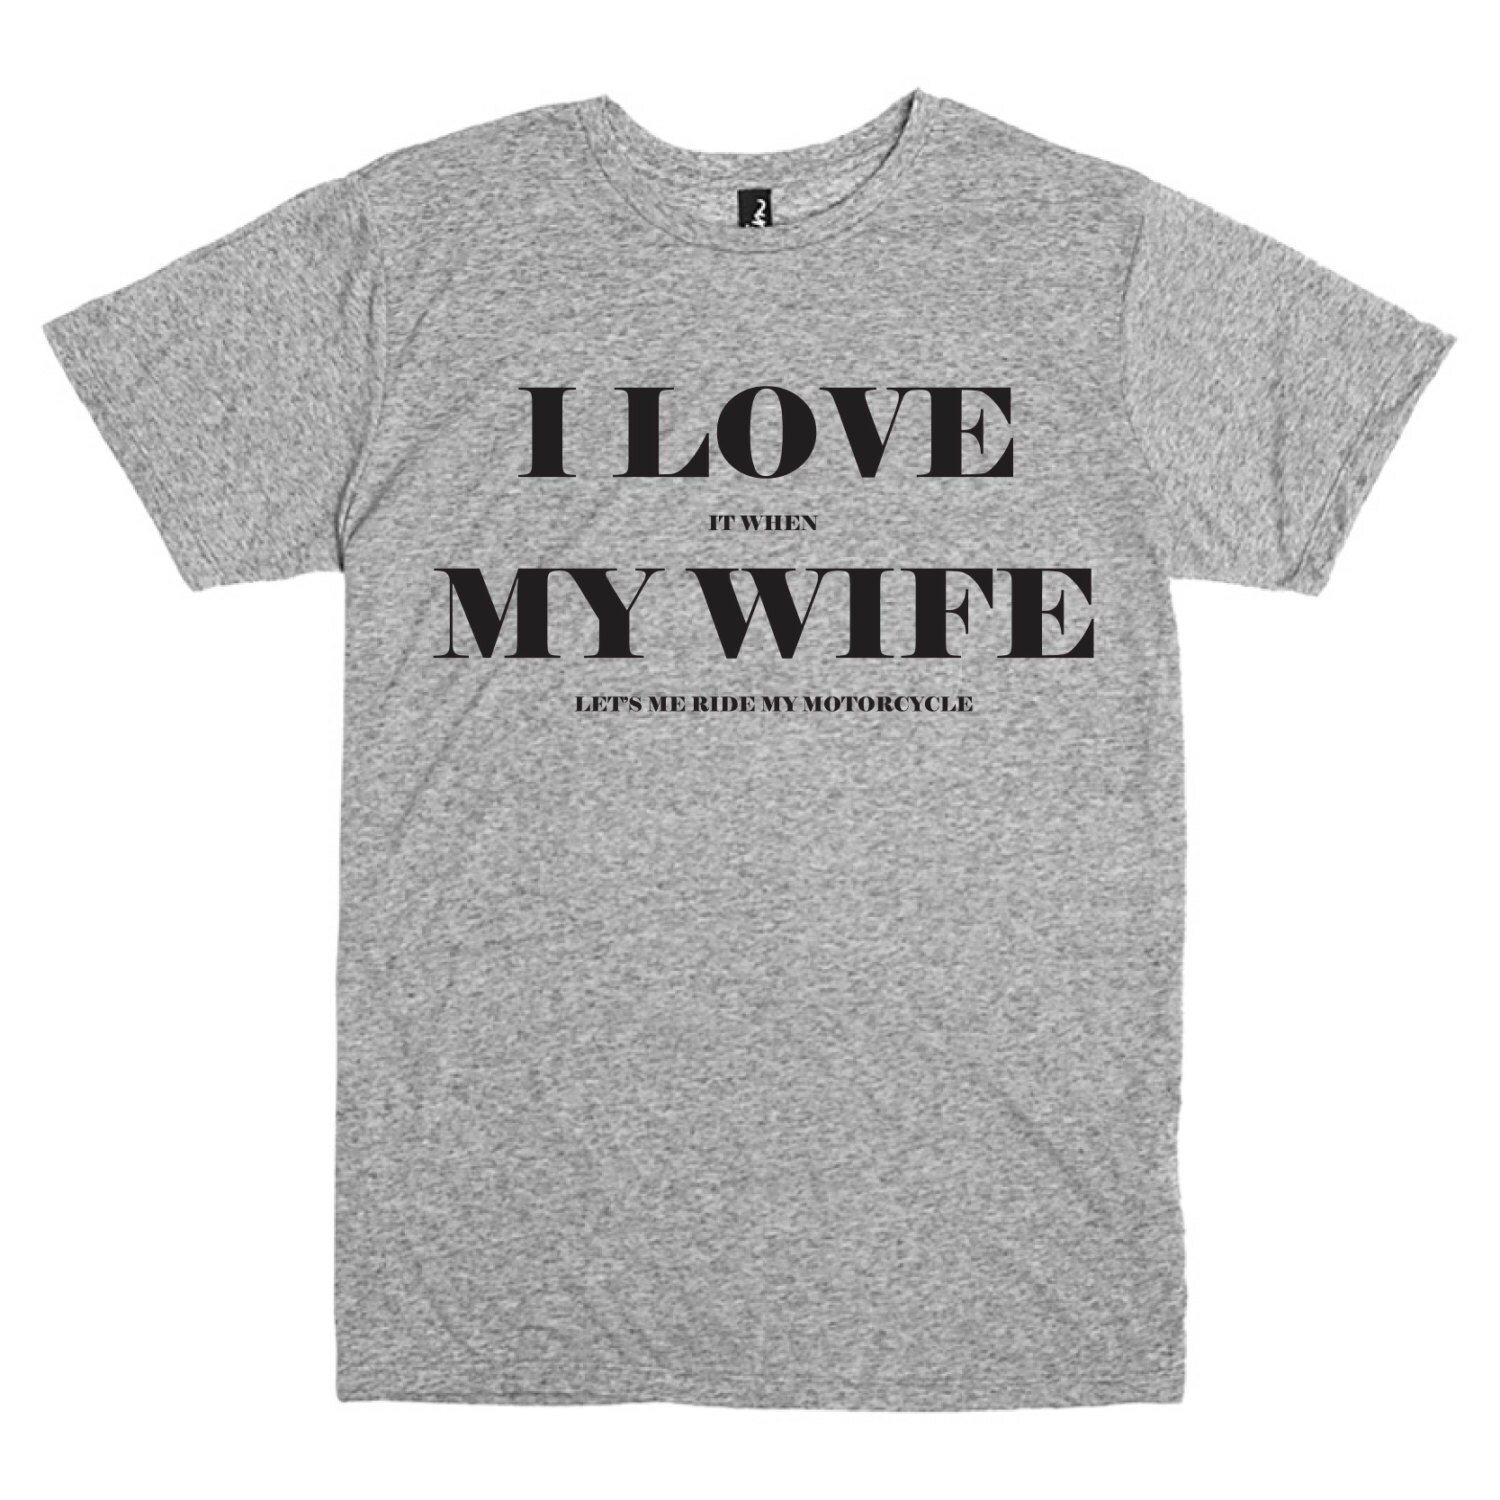 Funny motorcycle husband t-shirt by PinkPigPrinting on Etsy